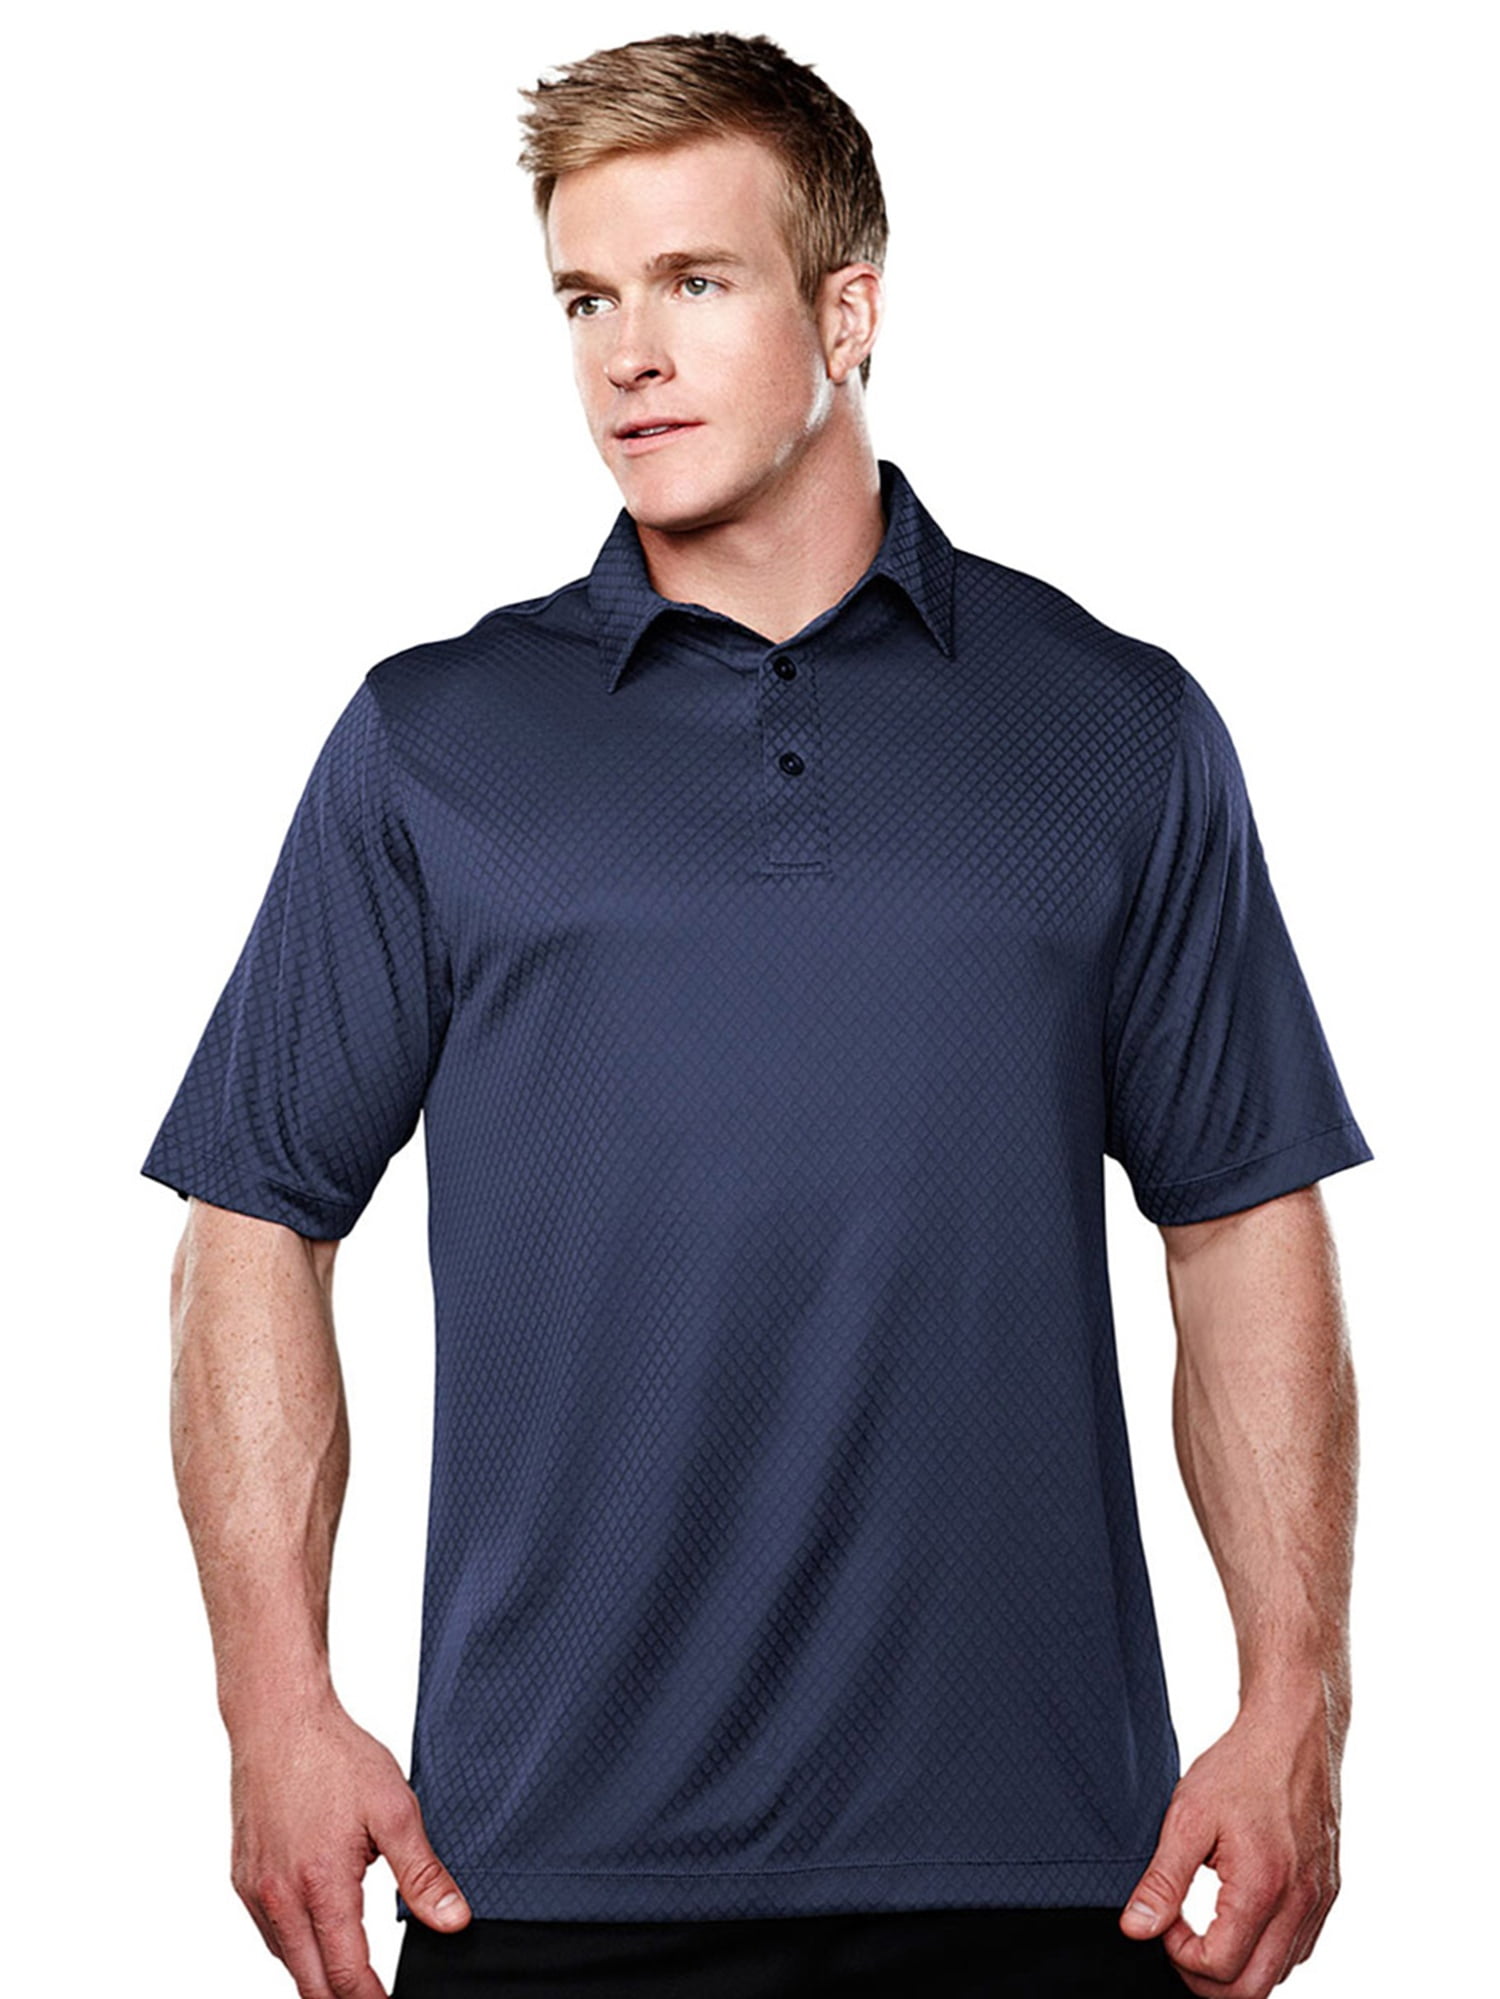 TWO TONE POLO SHIRT S-4XL 3 BUTTON PLACKET SHORT SLEEVE,SPORT MEN'S WICKING